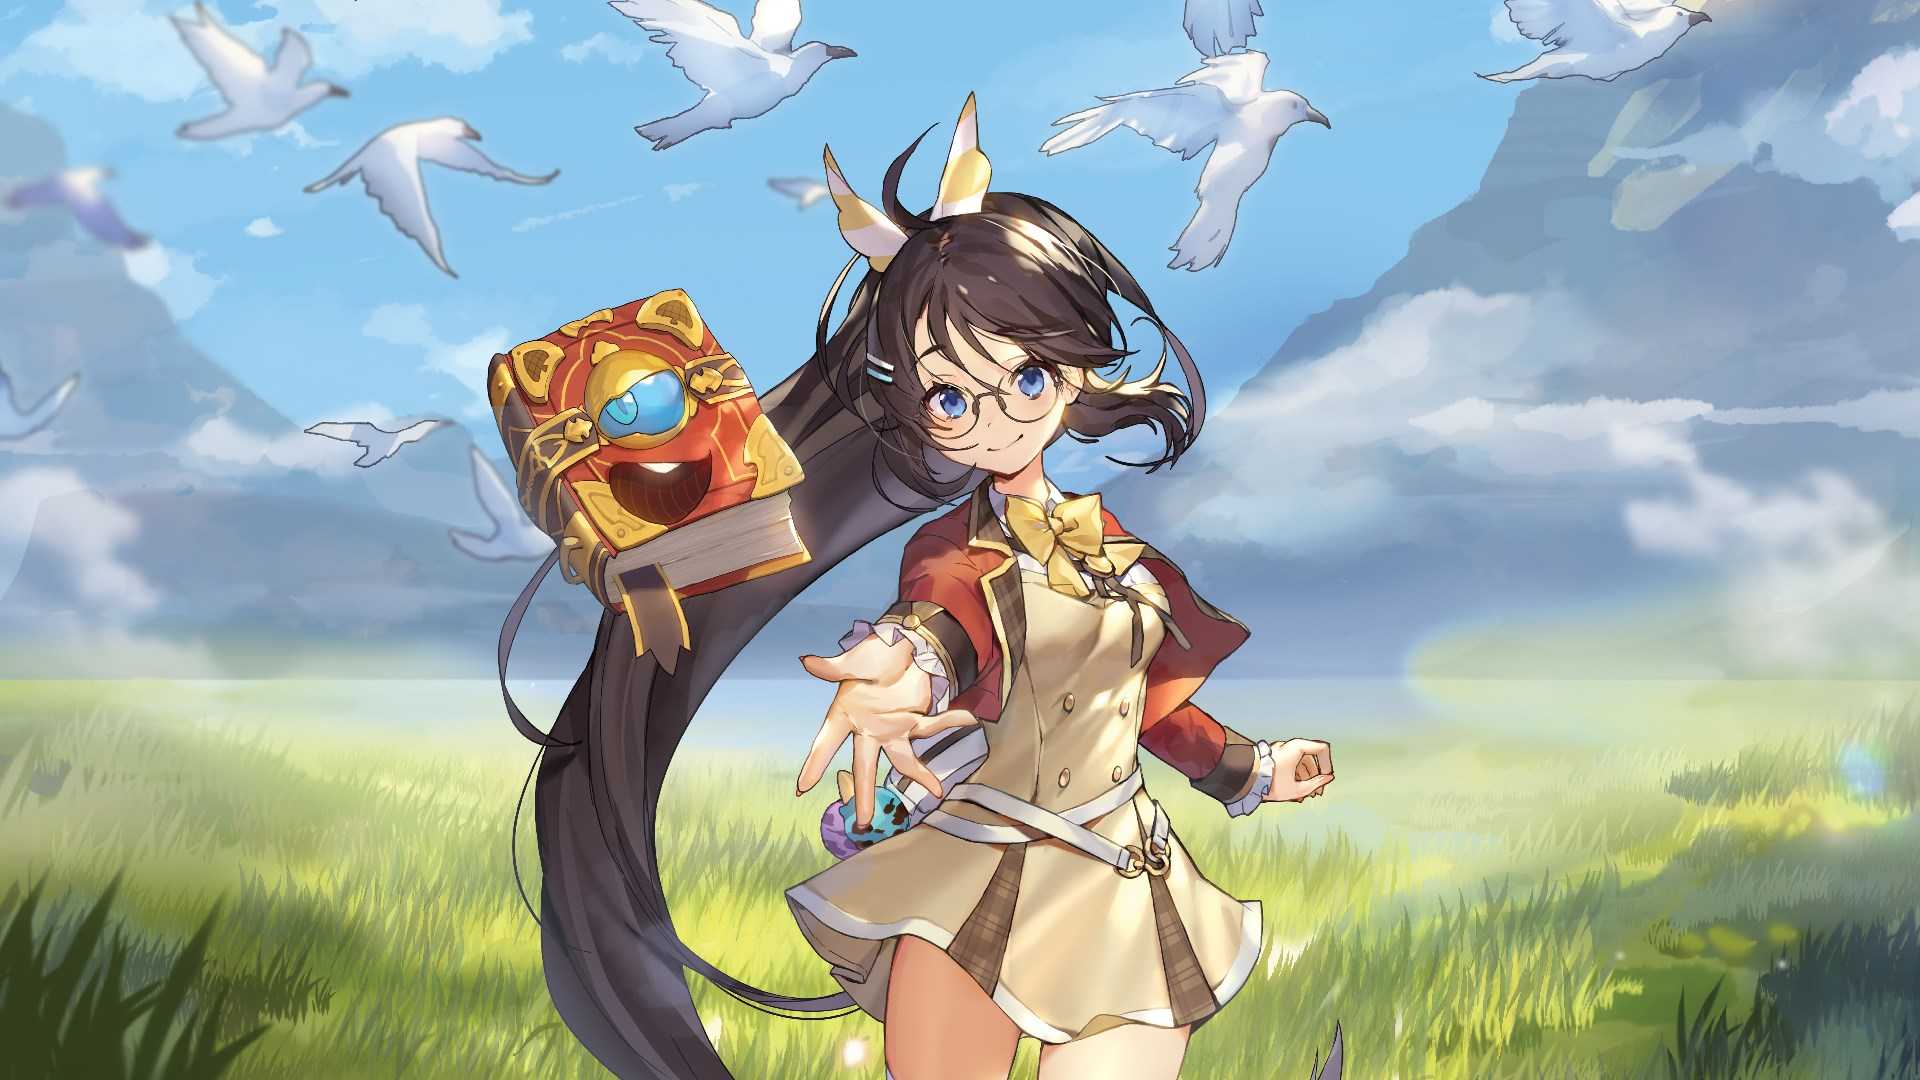 download the new version for iphoneRemiLore: Lost Girl in the Lands of Lore